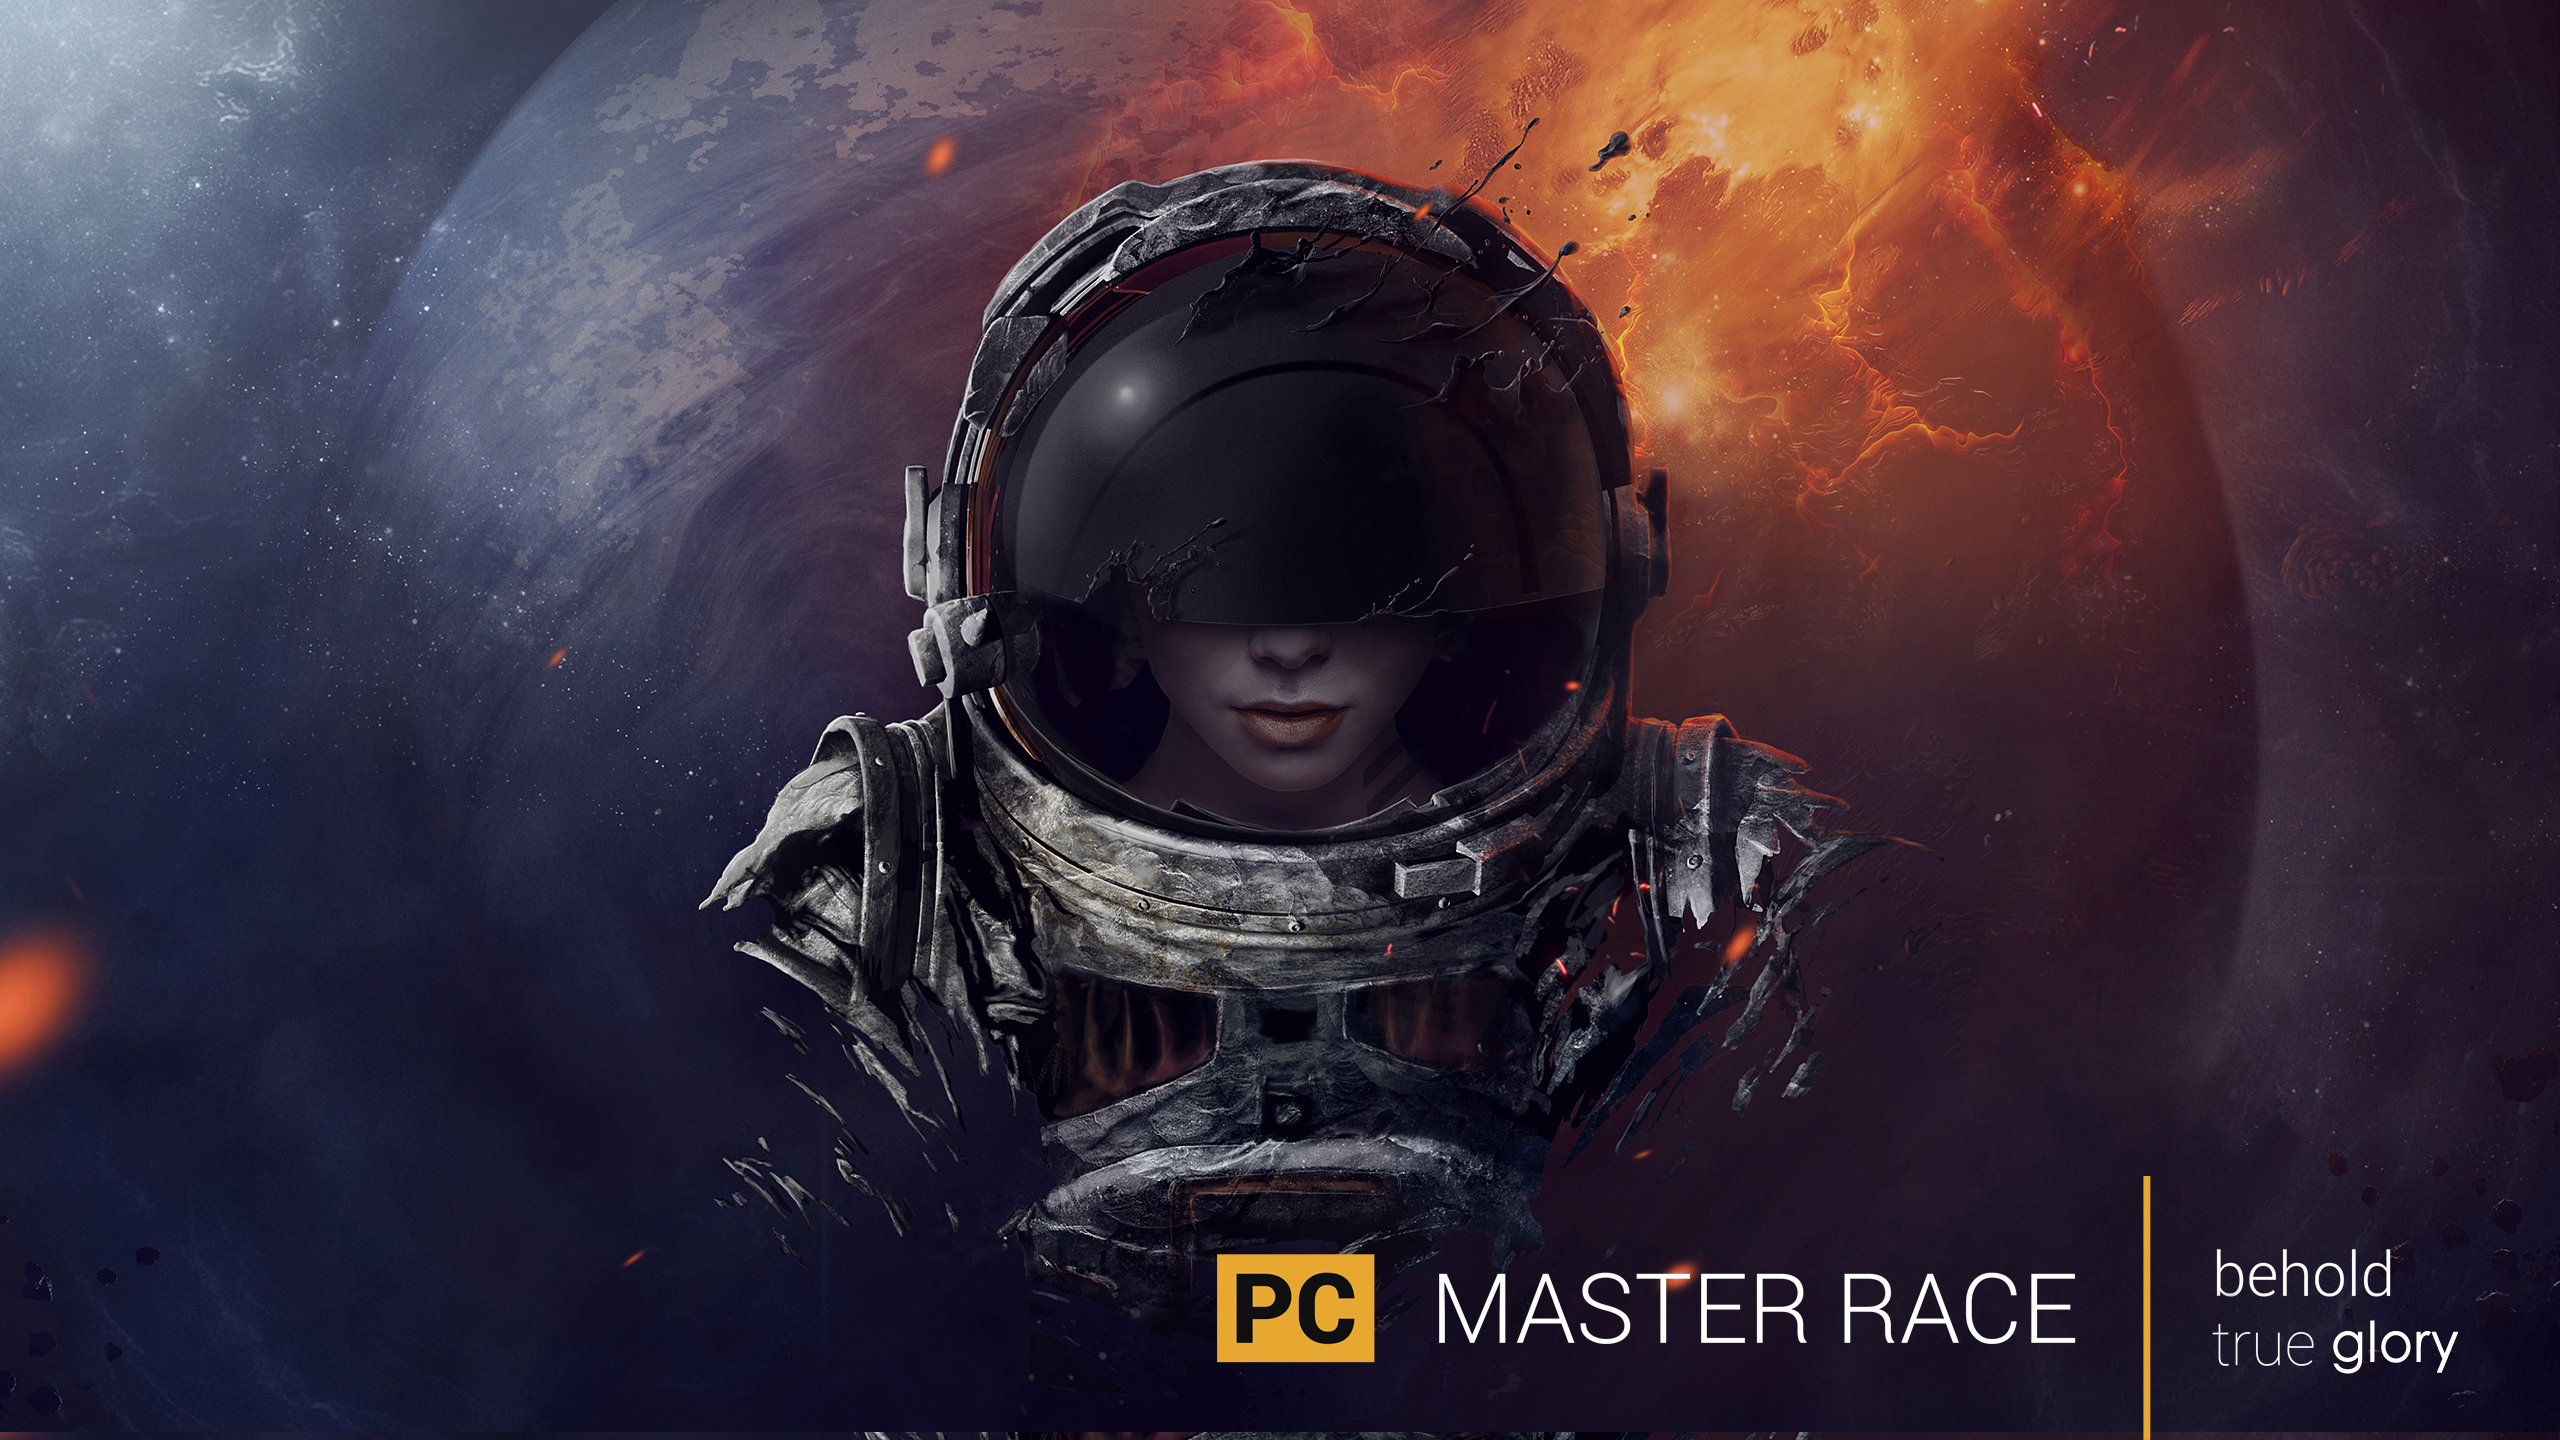 Free download 1440p space clipart Clipground [2560x1440] for your Desktop, Mobile & Tablet. Explore PC Master Race Wallpaper. PC Master Race Wallpaper, PC Master Race Wallpaper, Race Car Wallpaper